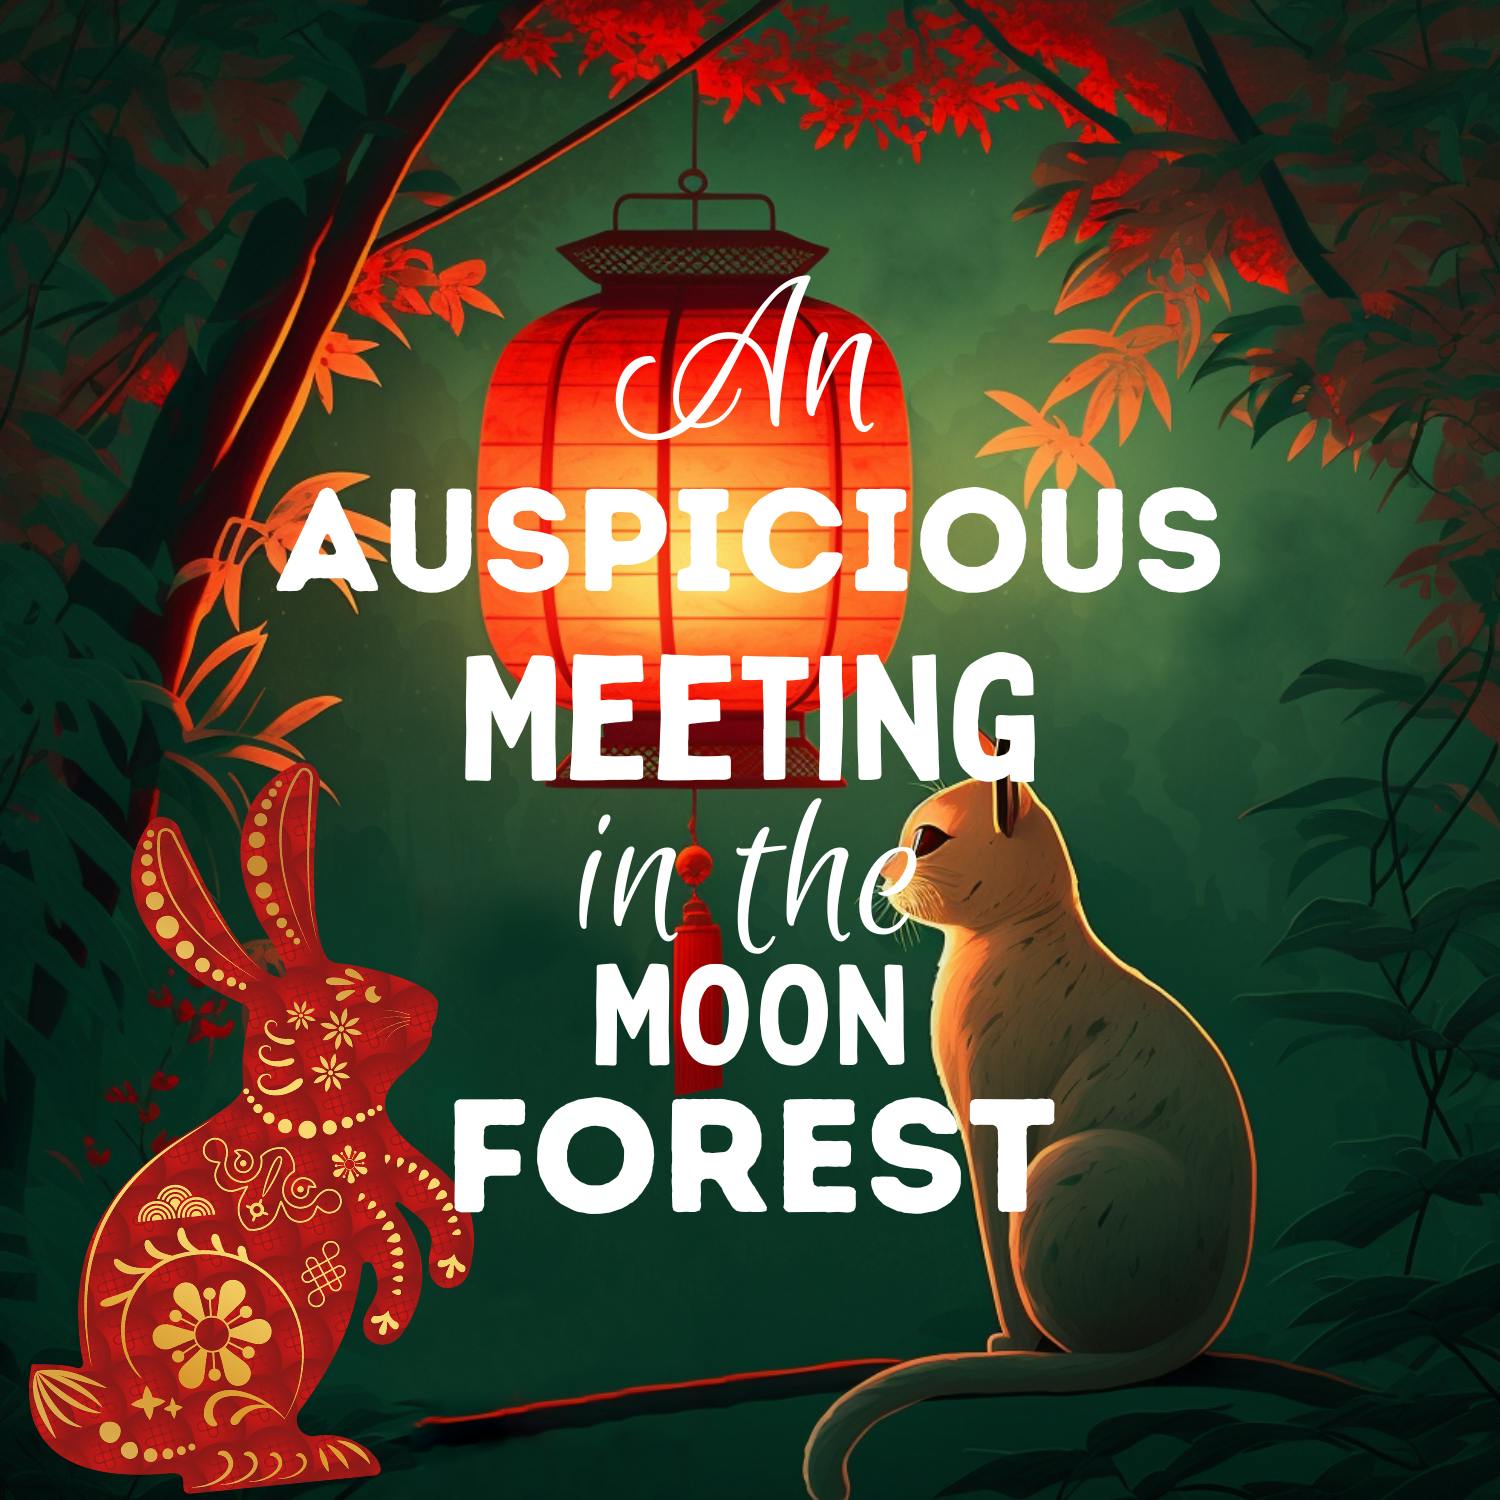 An Auspicious Meeting in the Moon Forest